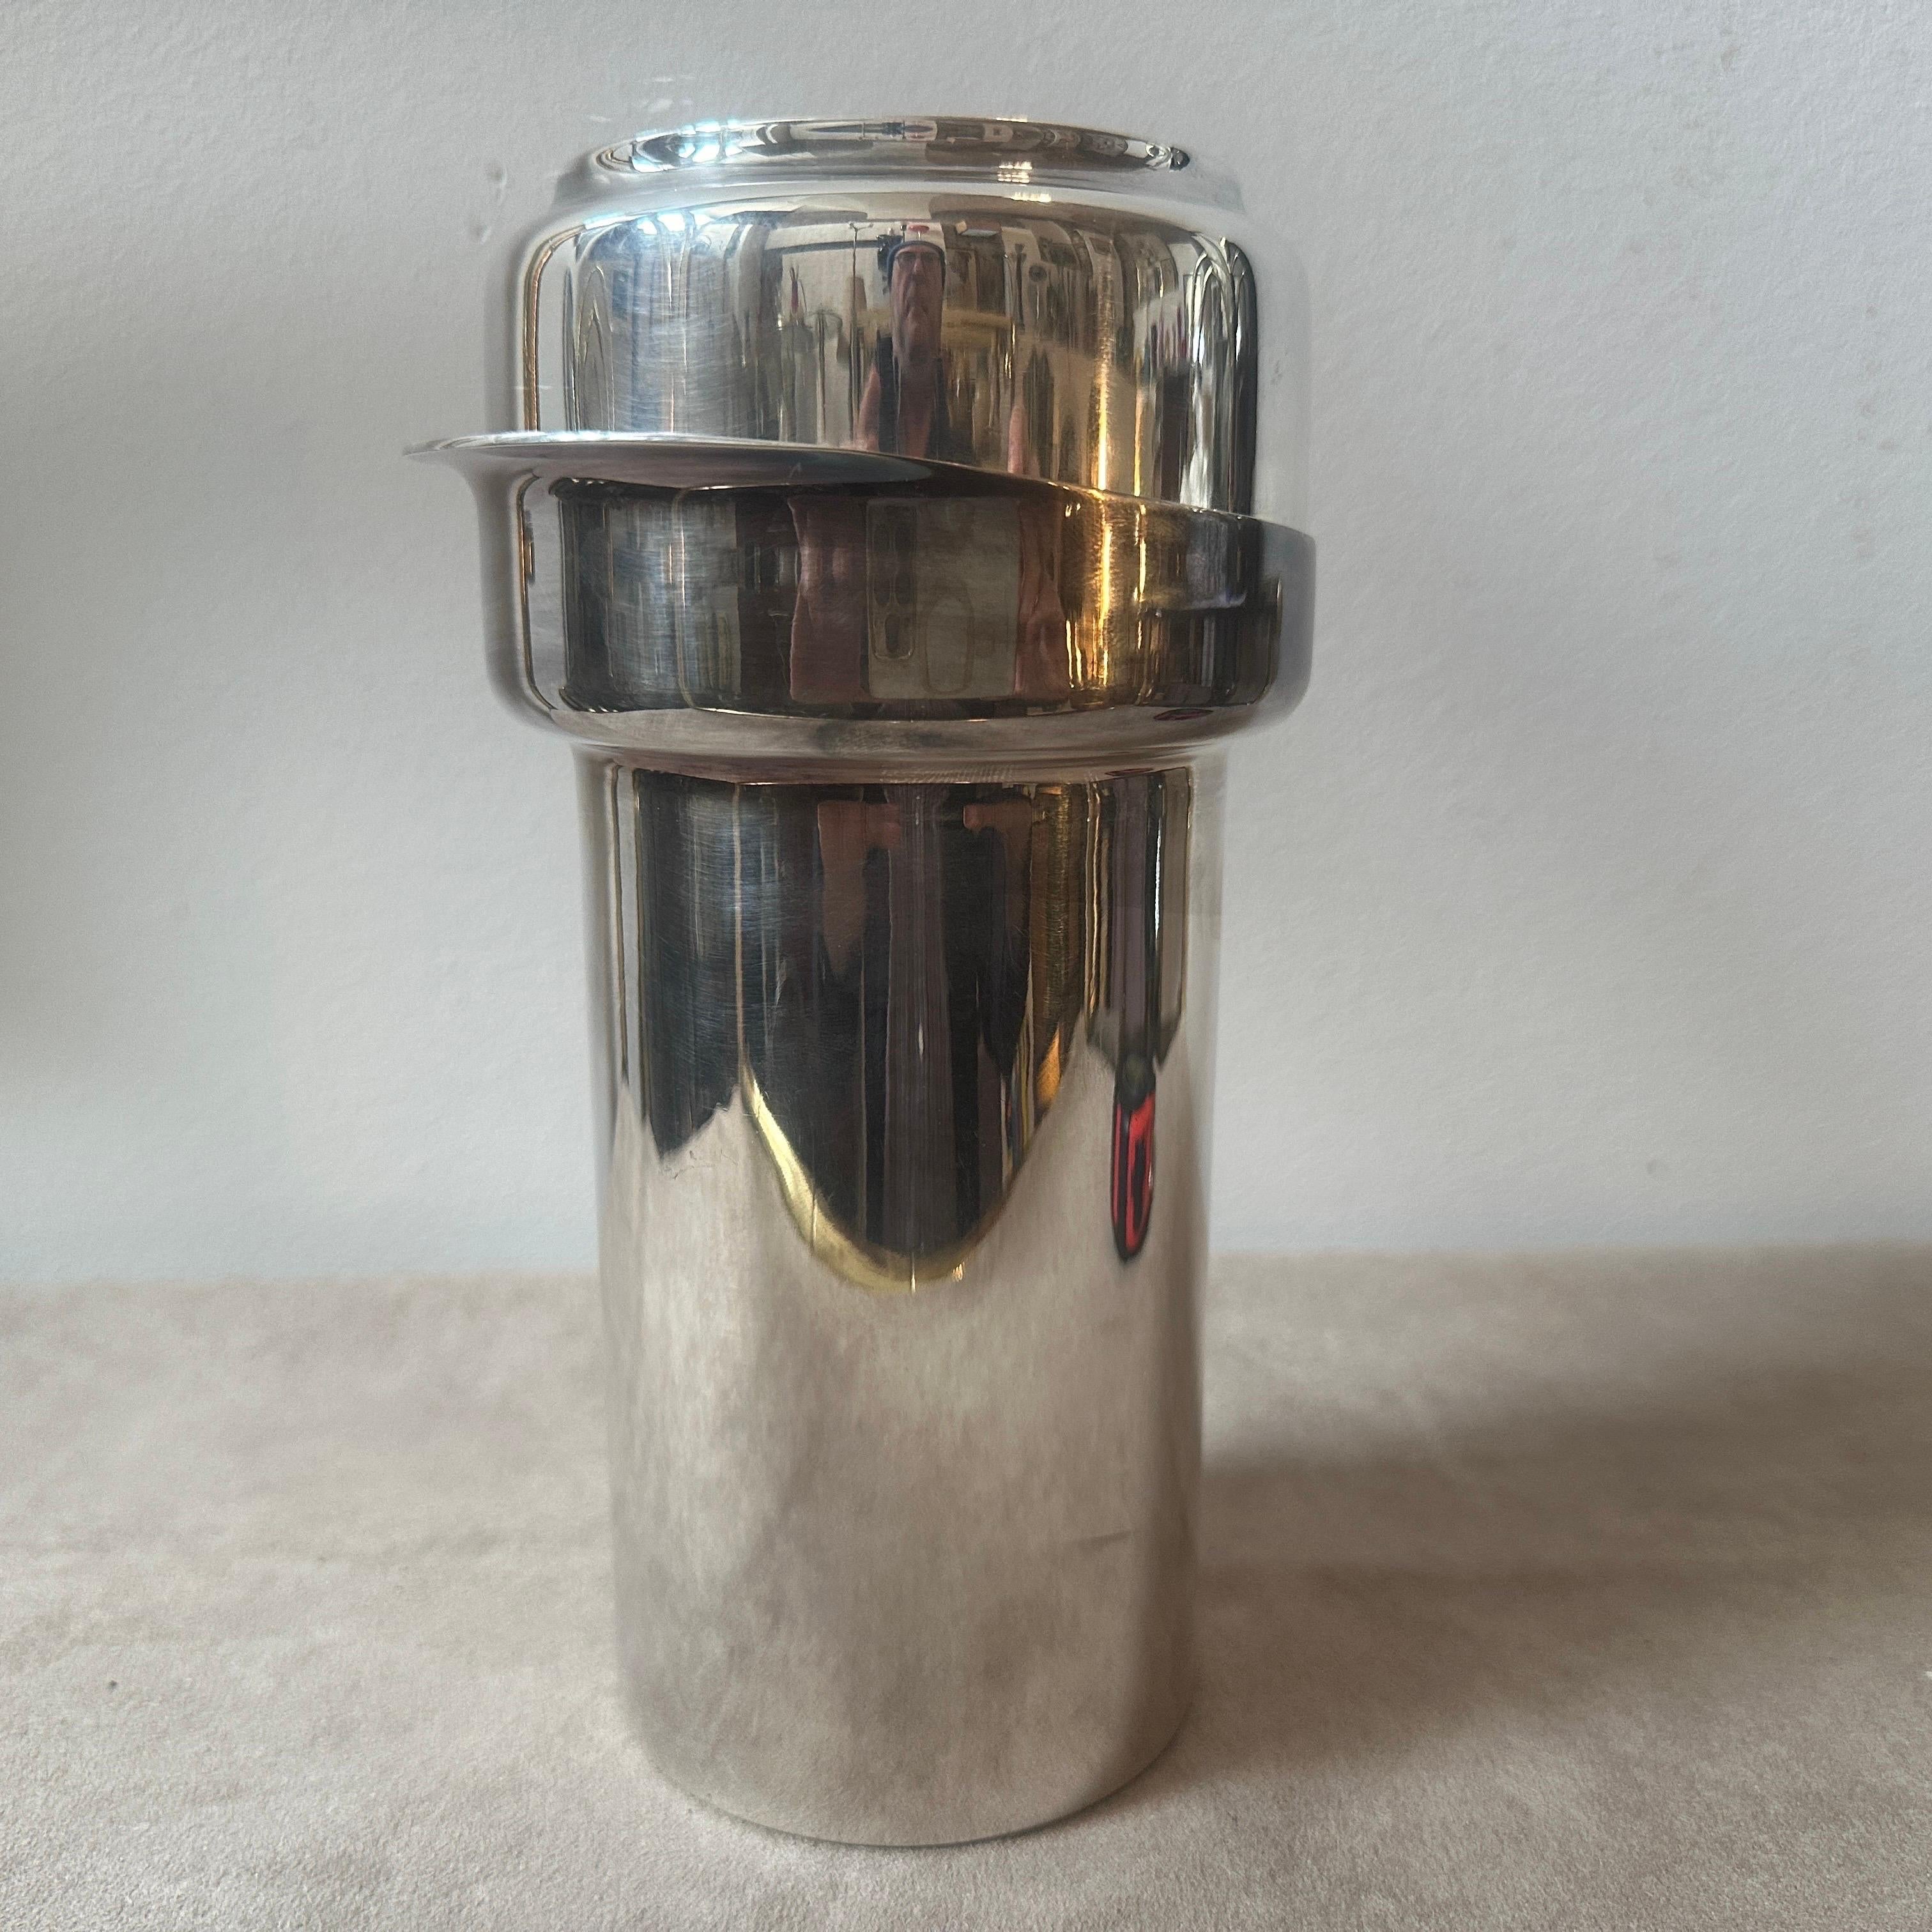 An iconic cocktail shaker designed by Lino Sabattini and manufactured by Sabattini Argenteria, it's in very good condition overall and marked on the bottom. This Cocktail Shaker by Lino Sabattini exemplifies the sleek, avant-garde aesthetics of the